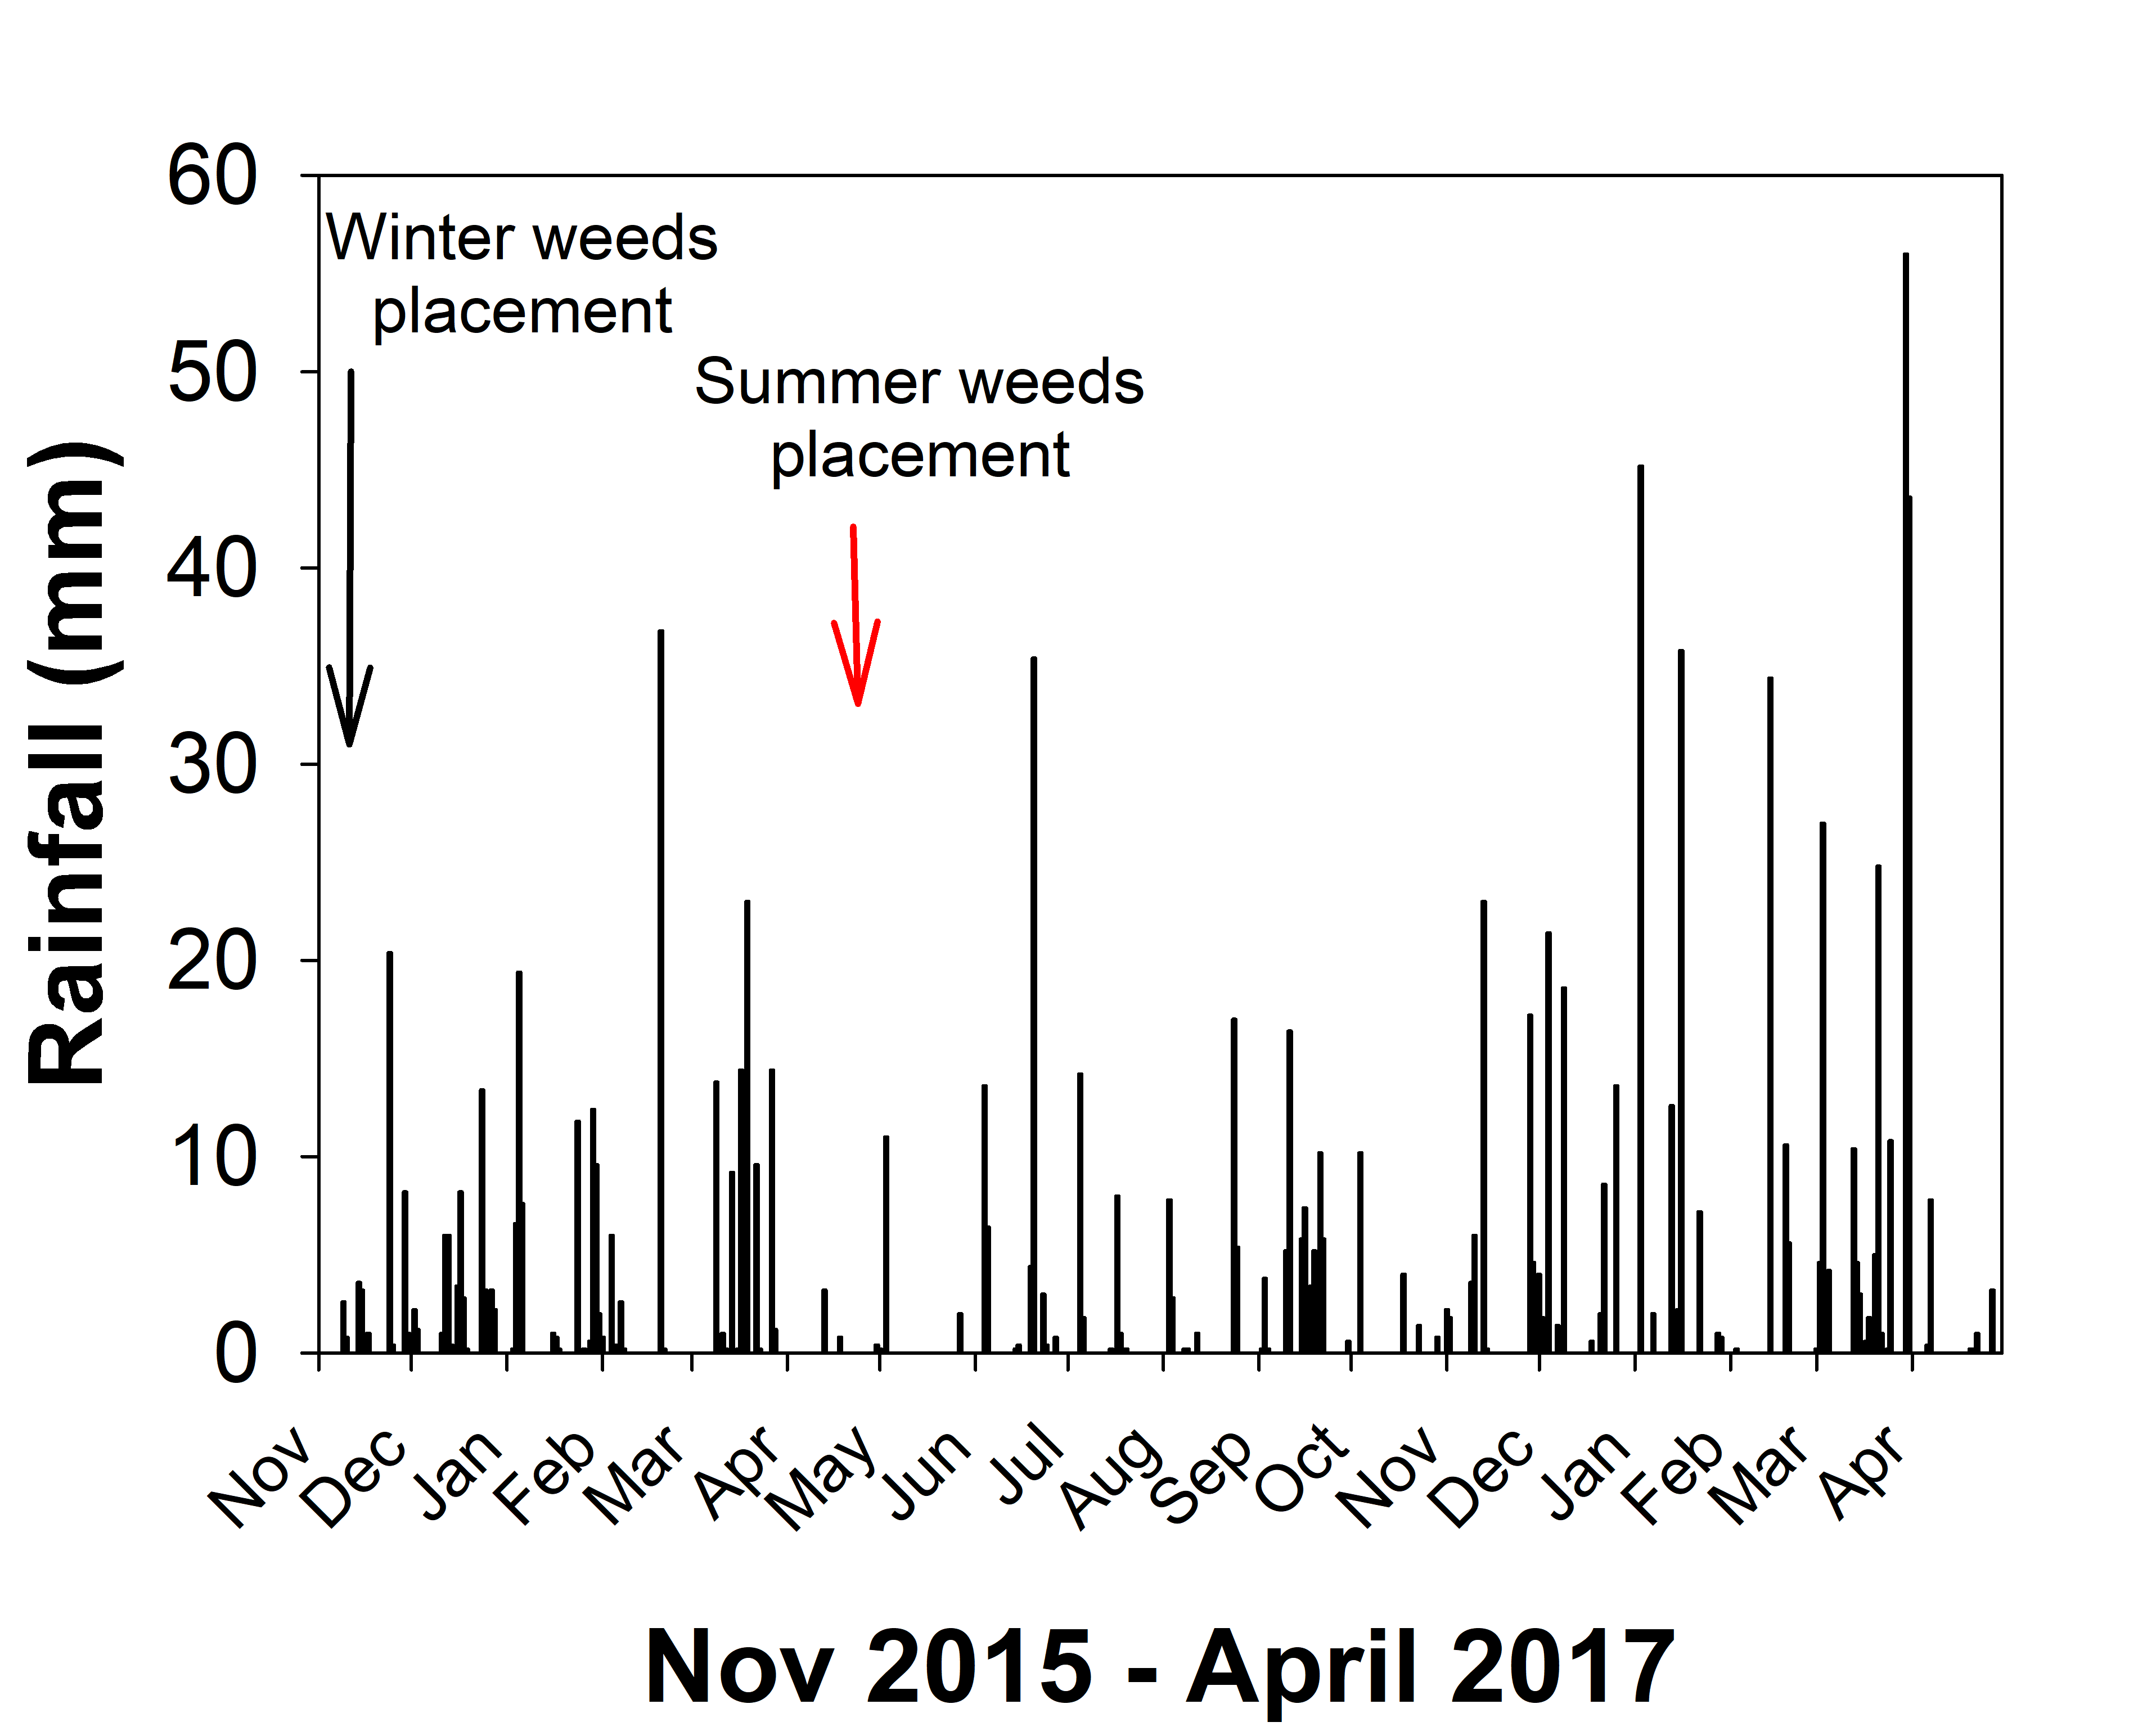 This rainfall chart shows the mm at Gatton from November 2015 to April 2017. Winter weed seeds were placed in the field in November 2015 and summer weed seeds in April 2016.